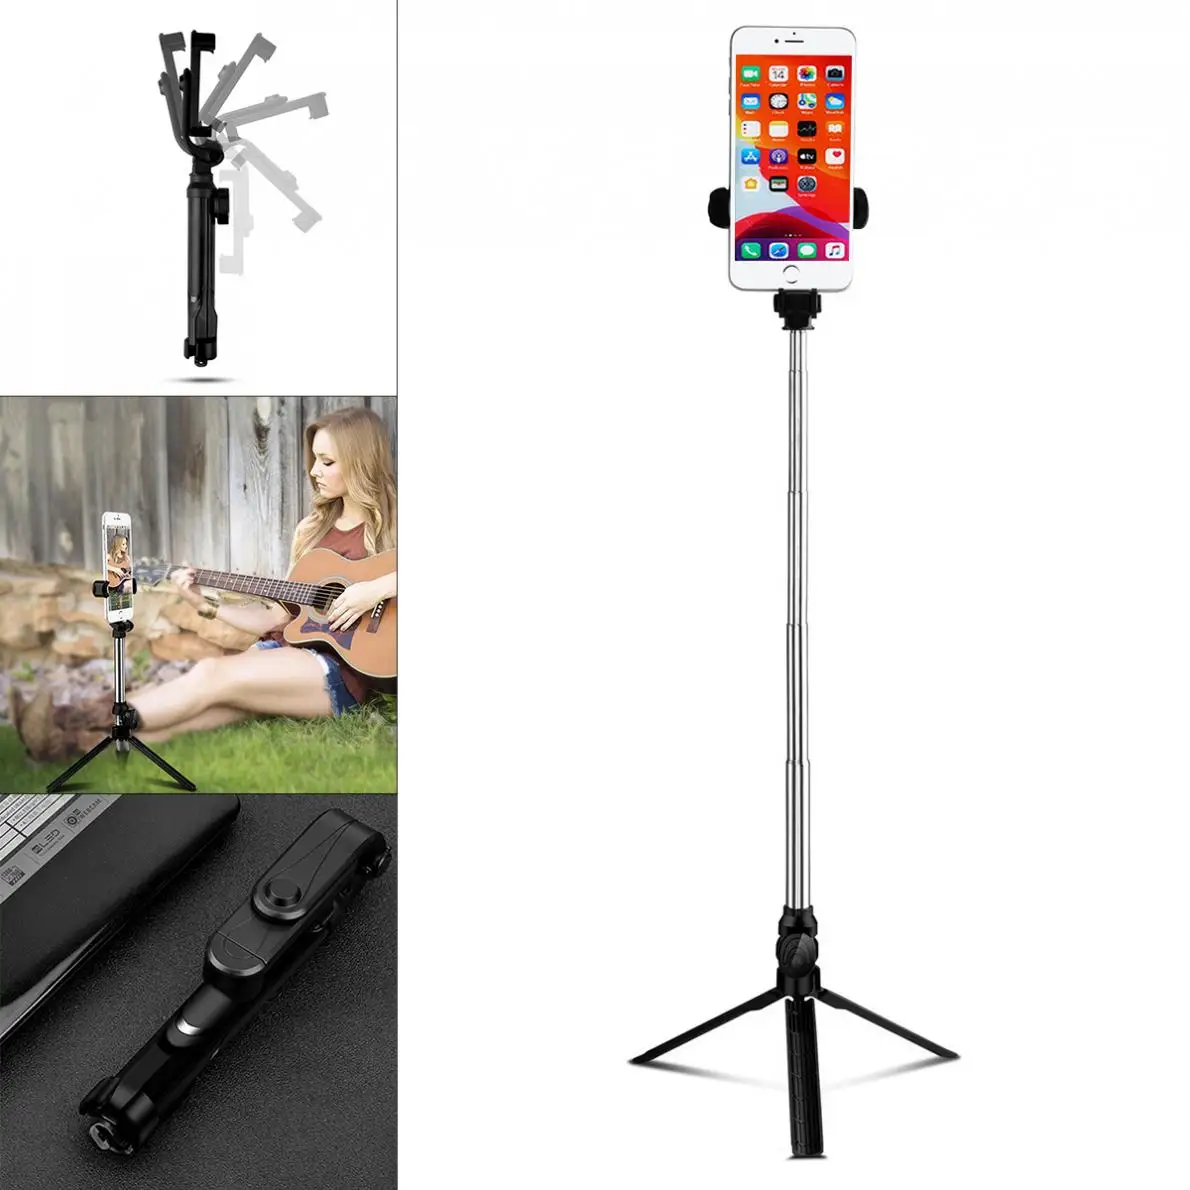 

New Tripod Selfie Stick XT10 Horizontal Shoot and Vertical Shoot Scalable Selfie Stick for Smartphone Android IOS Fit for Live